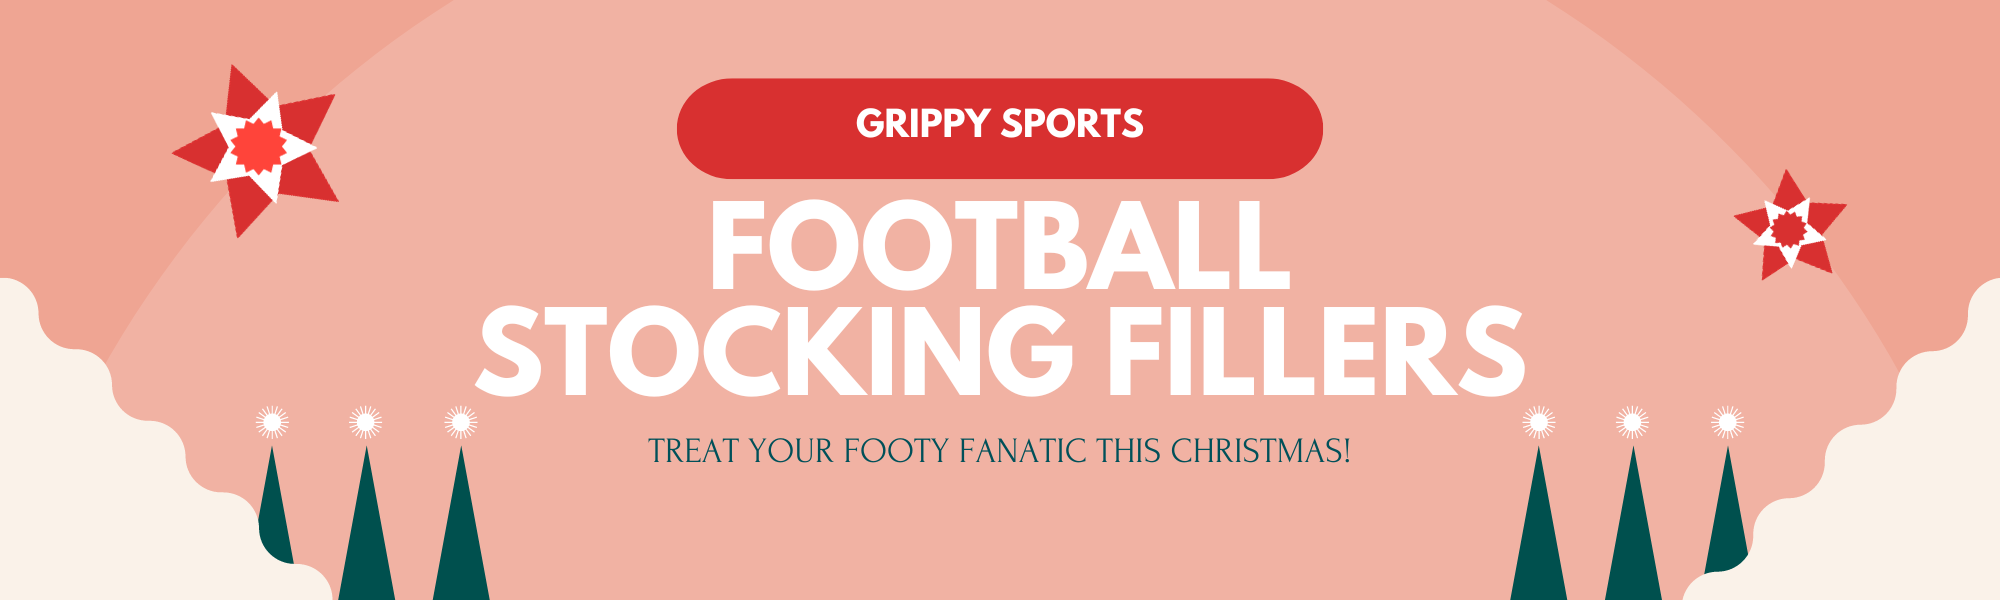 Football Stocking Fillers